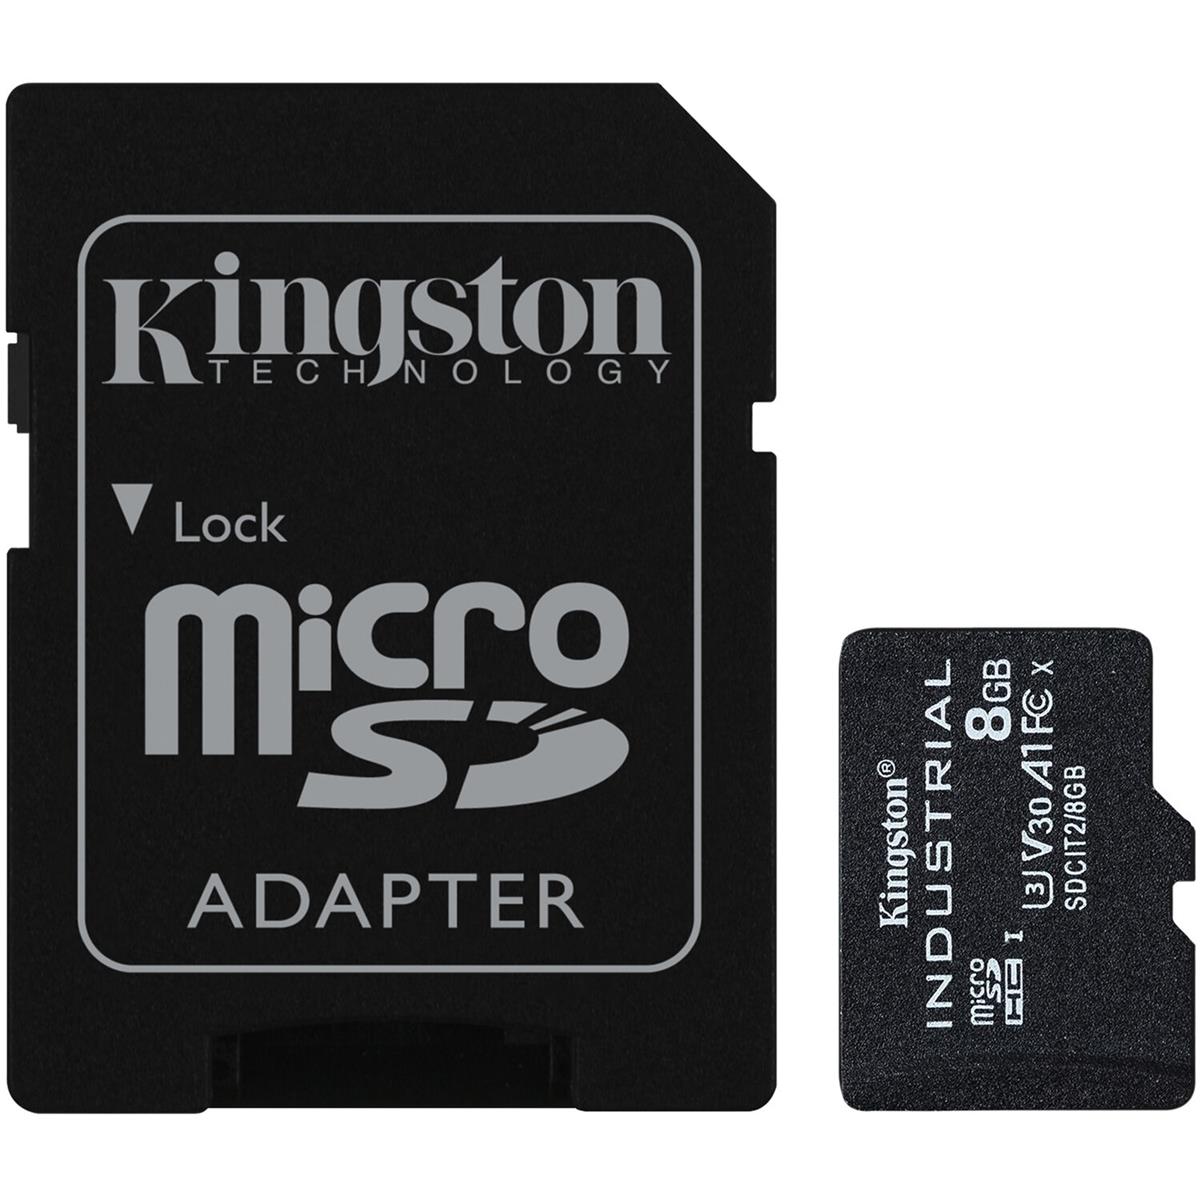 

Kingston Technology Industrial 8GB microSDHC UHS-I Memory Card with SD Adapter